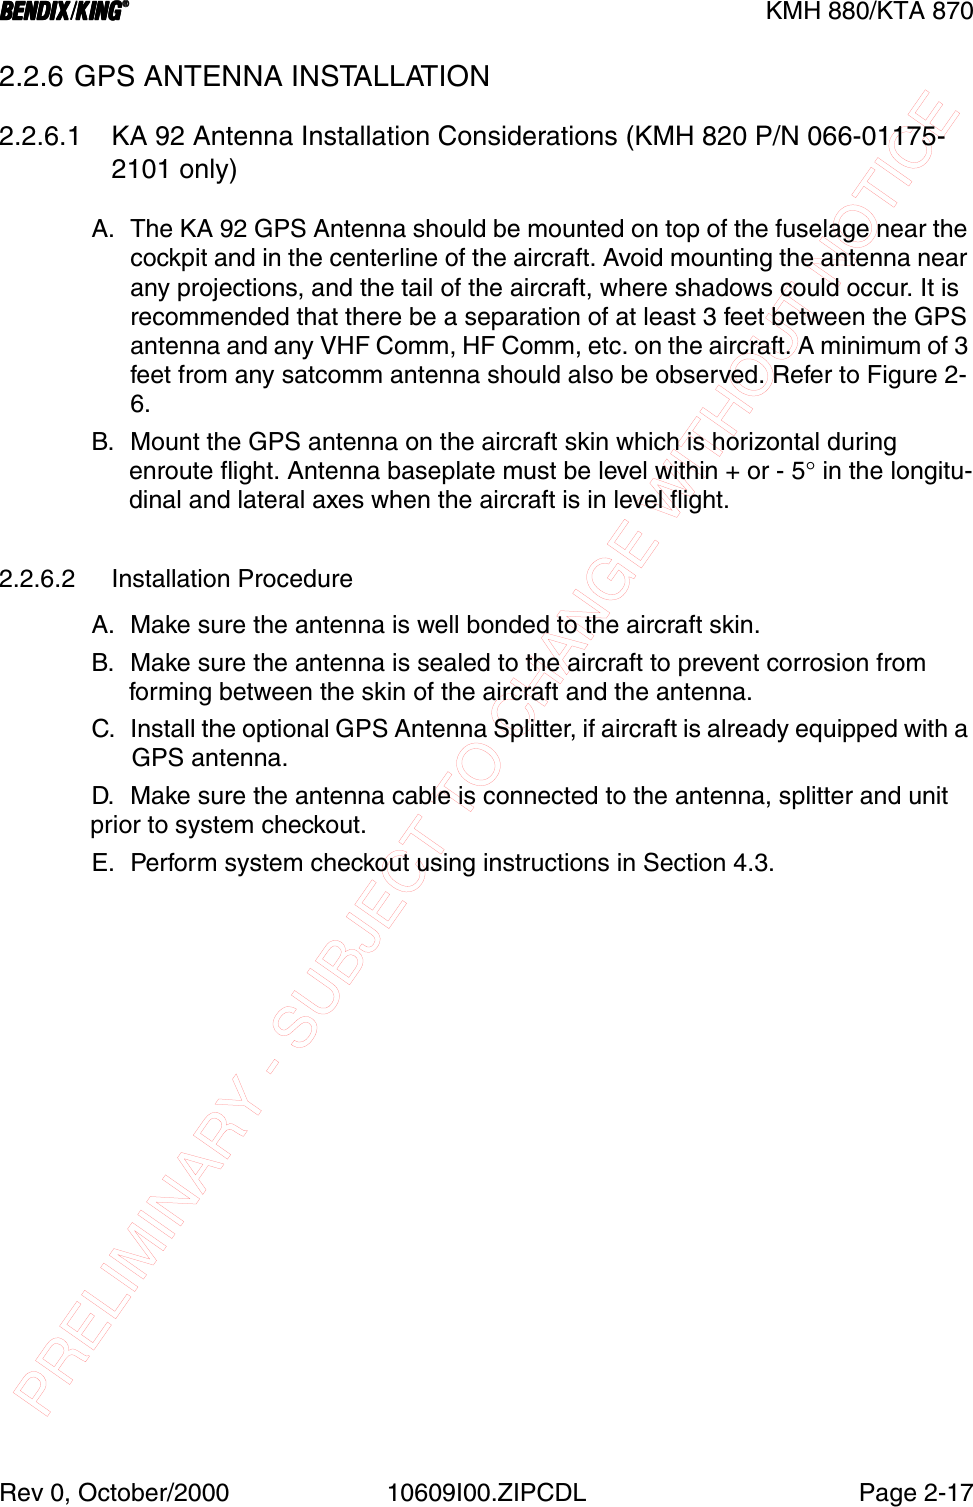 PRELIMINARY - SUBJECT TO CHANGE WITHOUT NOTICEBBBBKMH 880/KTA 870Rev 0, October/2000 10609I00.ZIPCDL Page 2-172.2.6 GPS ANTENNA INSTALLATION2.2.6.1 KA 92 Antenna Installation Considerations (KMH 820 P/N 066-01175-2101 only)A. The KA 92 GPS Antenna should be mounted on top of the fuselage near the cockpit and in the centerline of the aircraft. Avoid mounting the antenna near any projections, and the tail of the aircraft, where shadows could occur. It is recommended that there be a separation of at least 3 feet between the GPS antenna and any VHF Comm, HF Comm, etc. on the aircraft. A minimum of 3 feet from any satcomm antenna should also be observed. Refer to Figure 2- 6.B. Mount the GPS antenna on the aircraft skin which is horizontal during enroute flight. Antenna baseplate must be level within + or - 5° in the longitu-dinal and lateral axes when the aircraft is in level flight.2.2.6.2 Installation ProcedureA. Make sure the antenna is well bonded to the aircraft skin.B. Make sure the antenna is sealed to the aircraft to prevent corrosion from forming between the skin of the aircraft and the antenna.C. Install the optional GPS Antenna Splitter, if aircraft is already equipped with a GPS antenna.D. Make sure the antenna cable is connected to the antenna, splitter and unit prior to system checkout.E. Perform system checkout using instructions in Section 4.3.